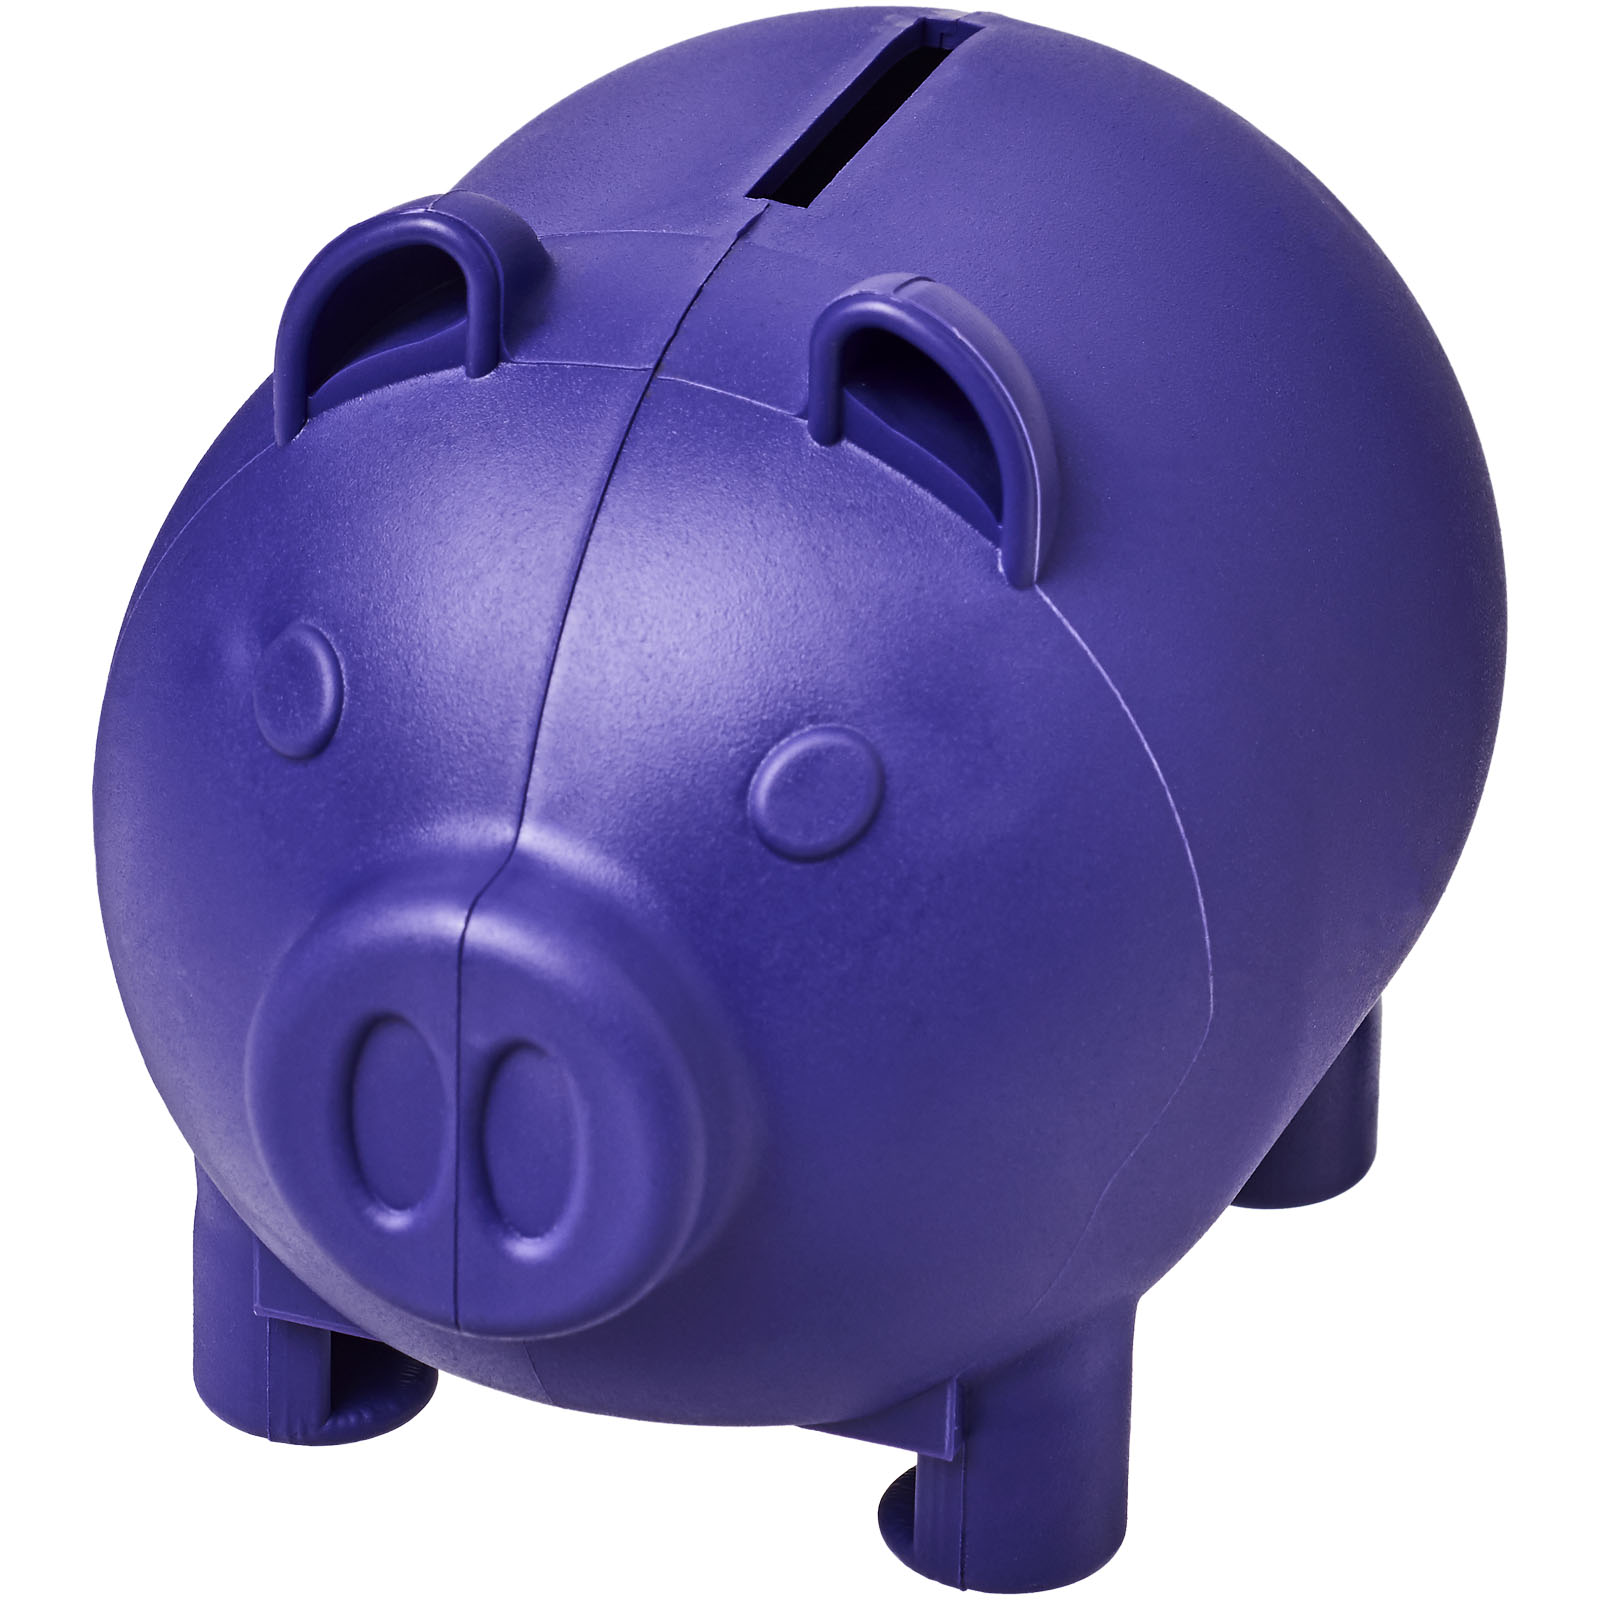 Advertising Home Accessories - Oink small piggy bank - 0